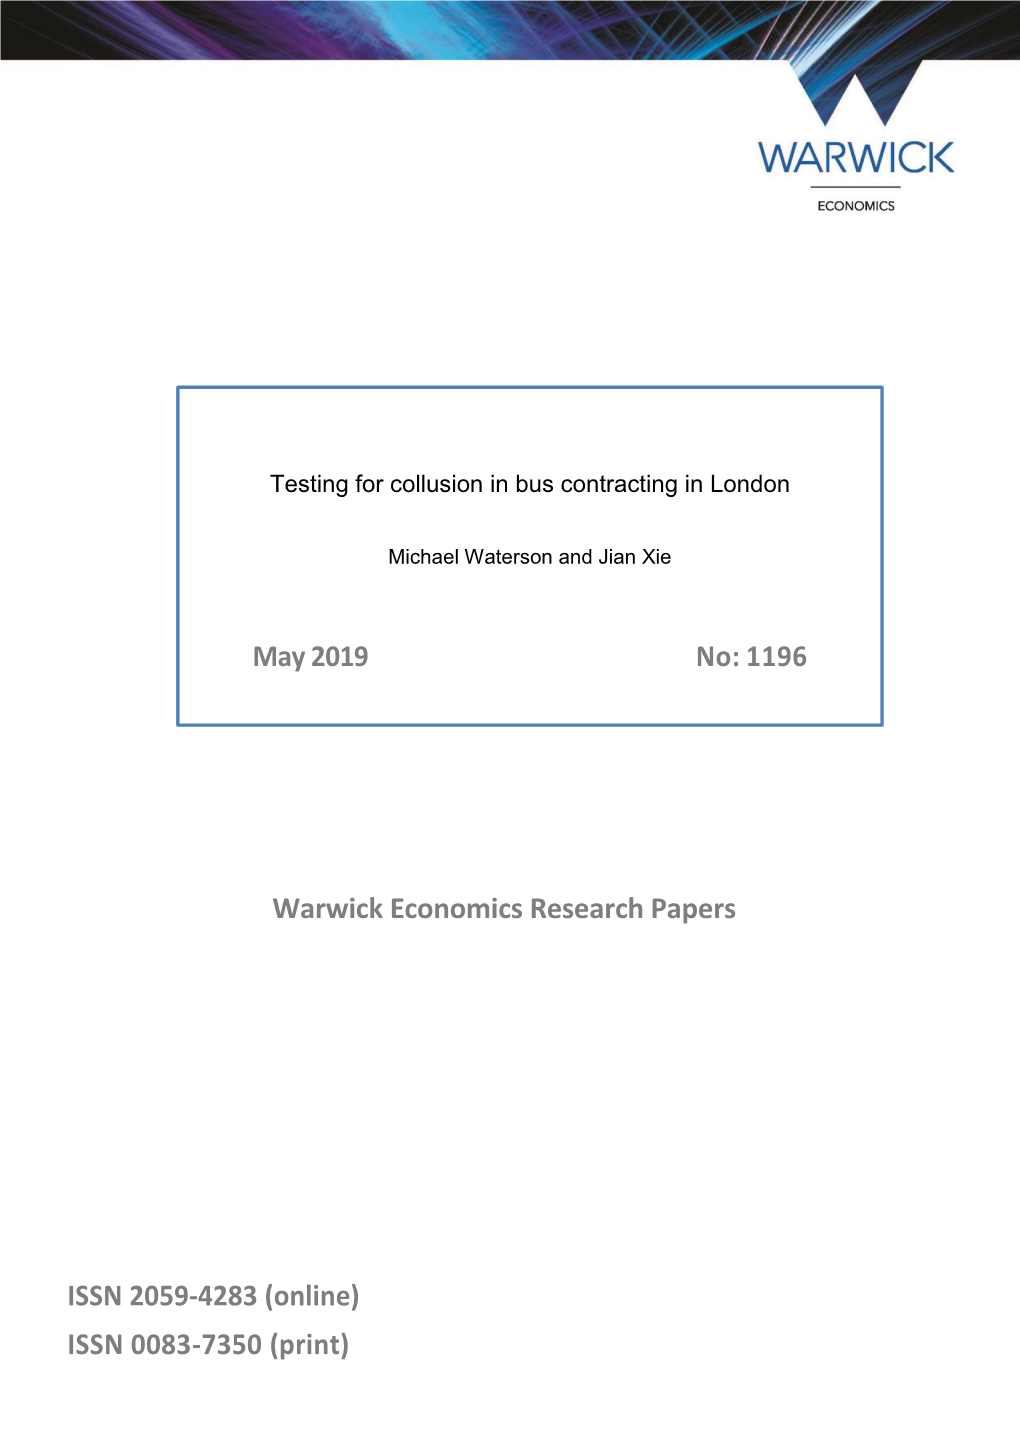 Warwick Economics Research Papers ISSN 2059-4283 (Online) ISSN